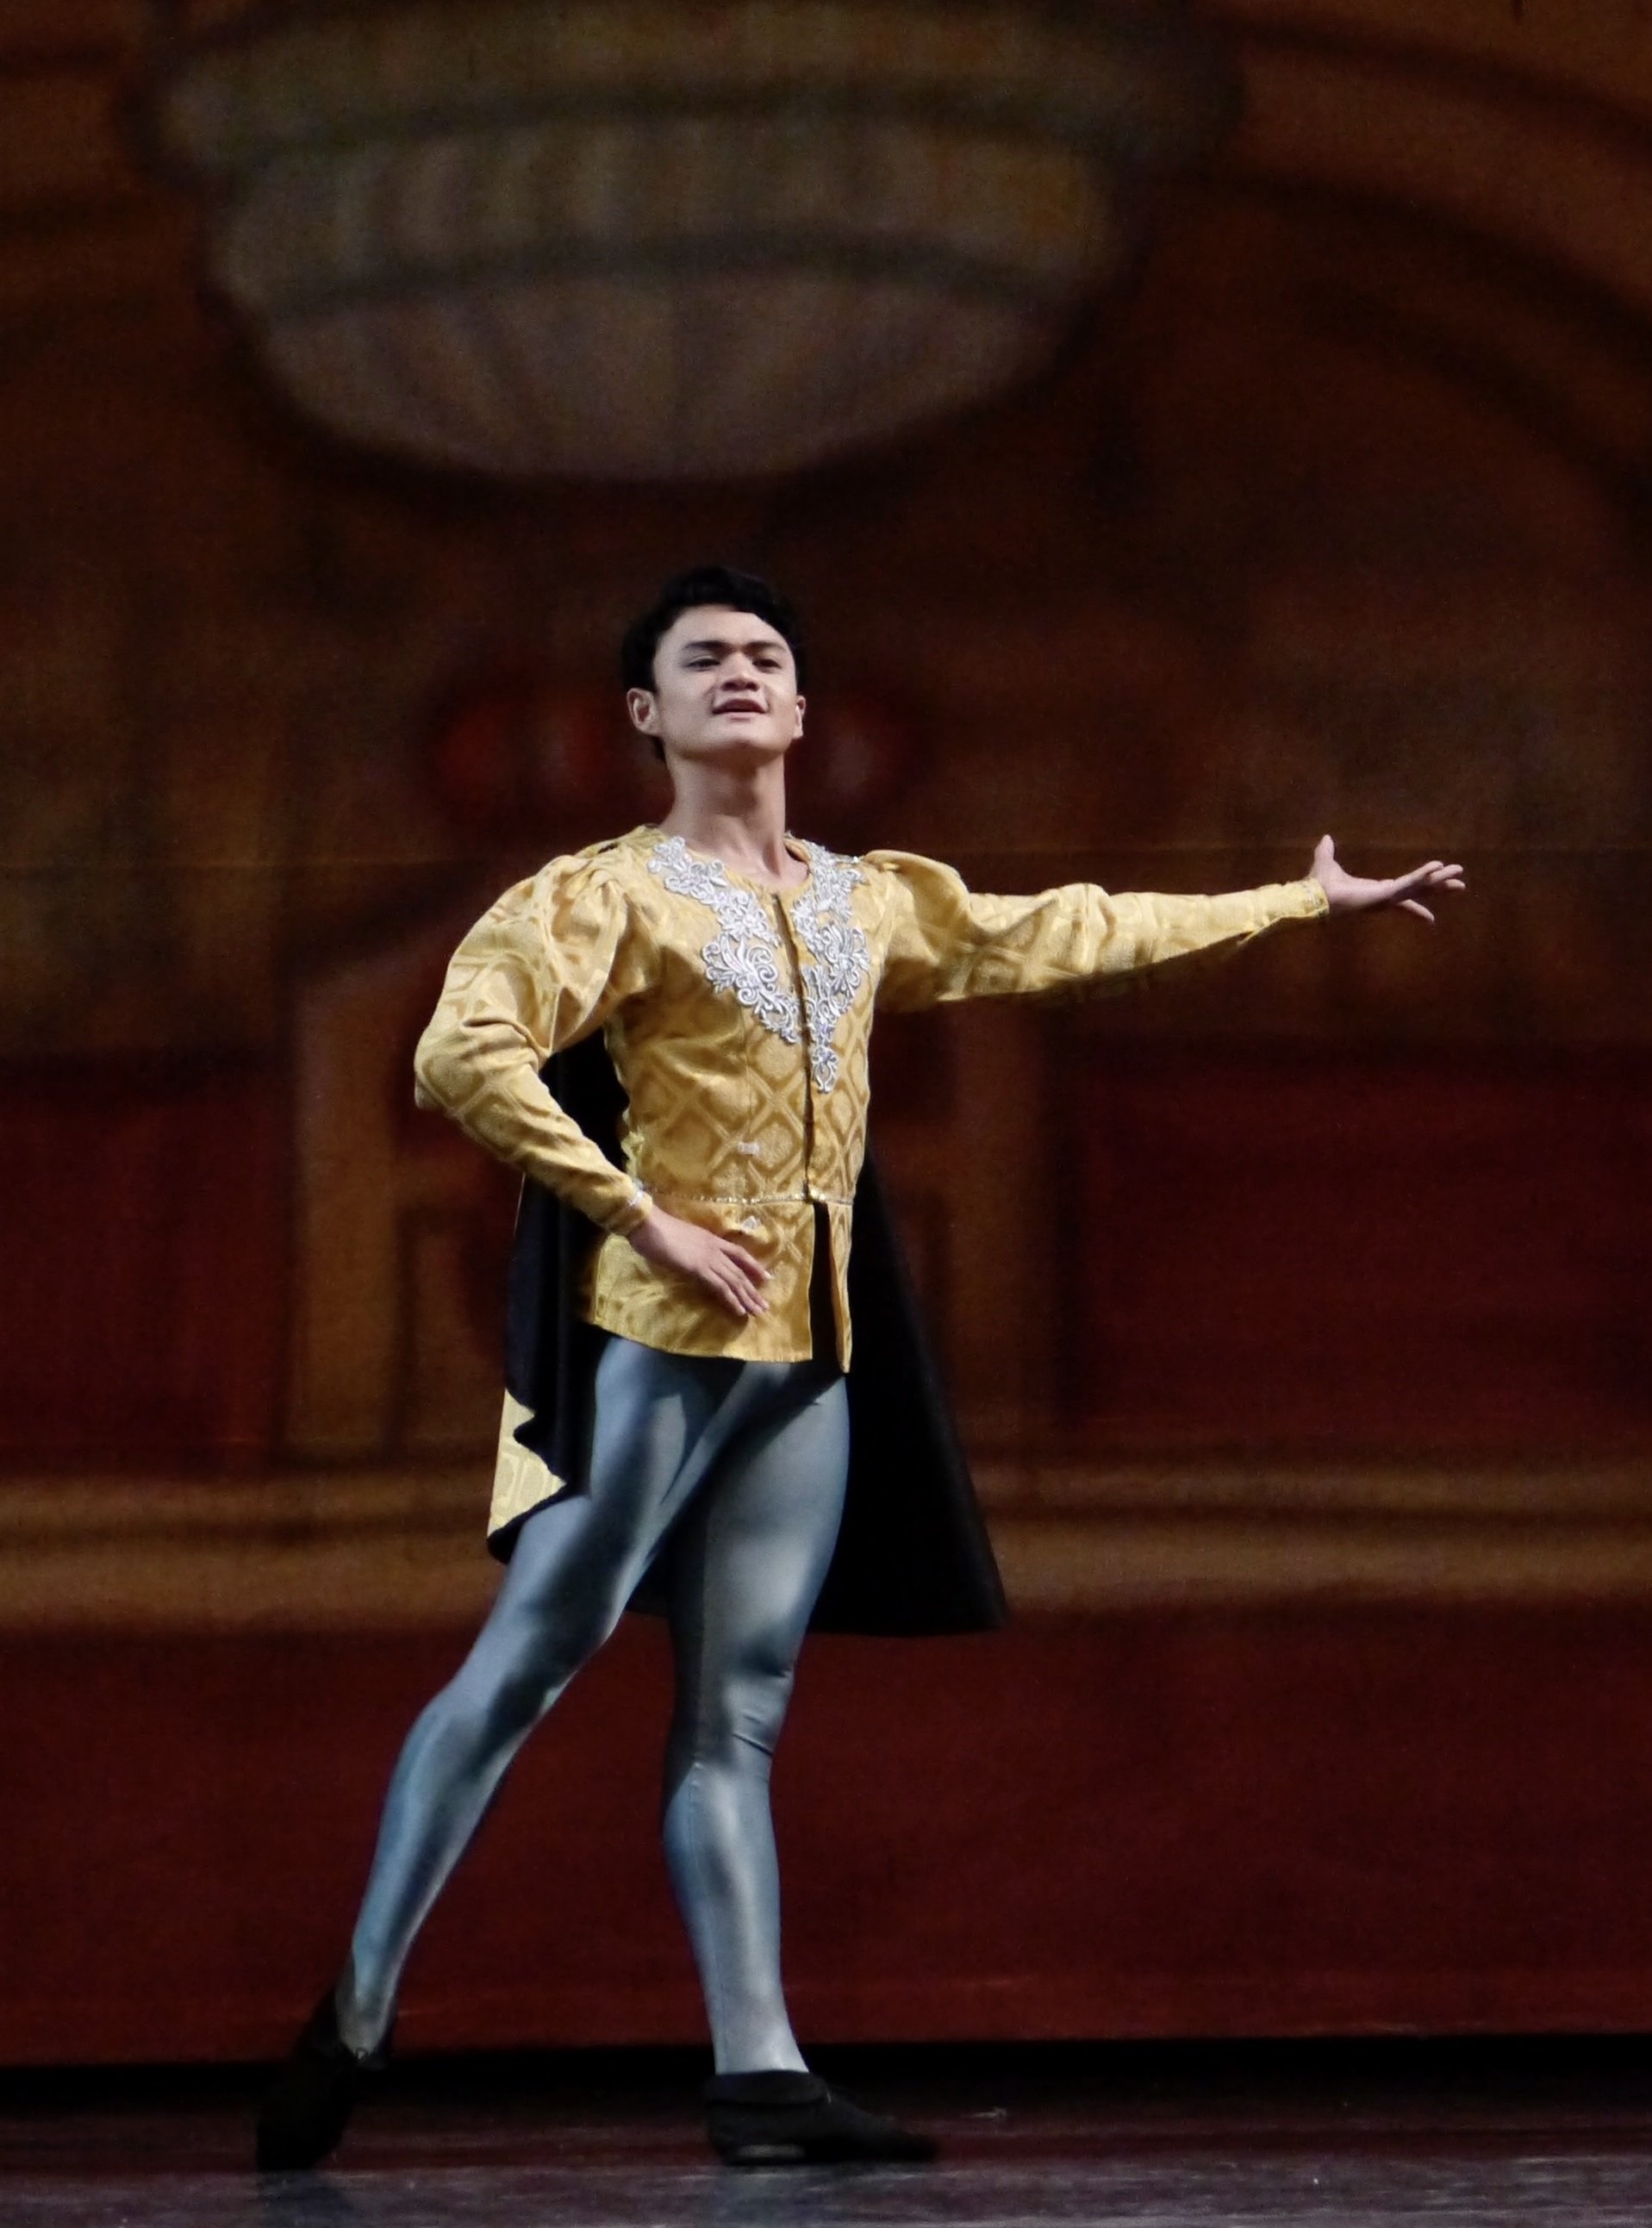    Joshua Enciso is debonaire in yellow coat and gray tights, performing as one of Prince Siegfried’s friends attending the royal’s 21st birthday ball in  Swan Lake  (2017). Photo by Giselle P. Kasilag   